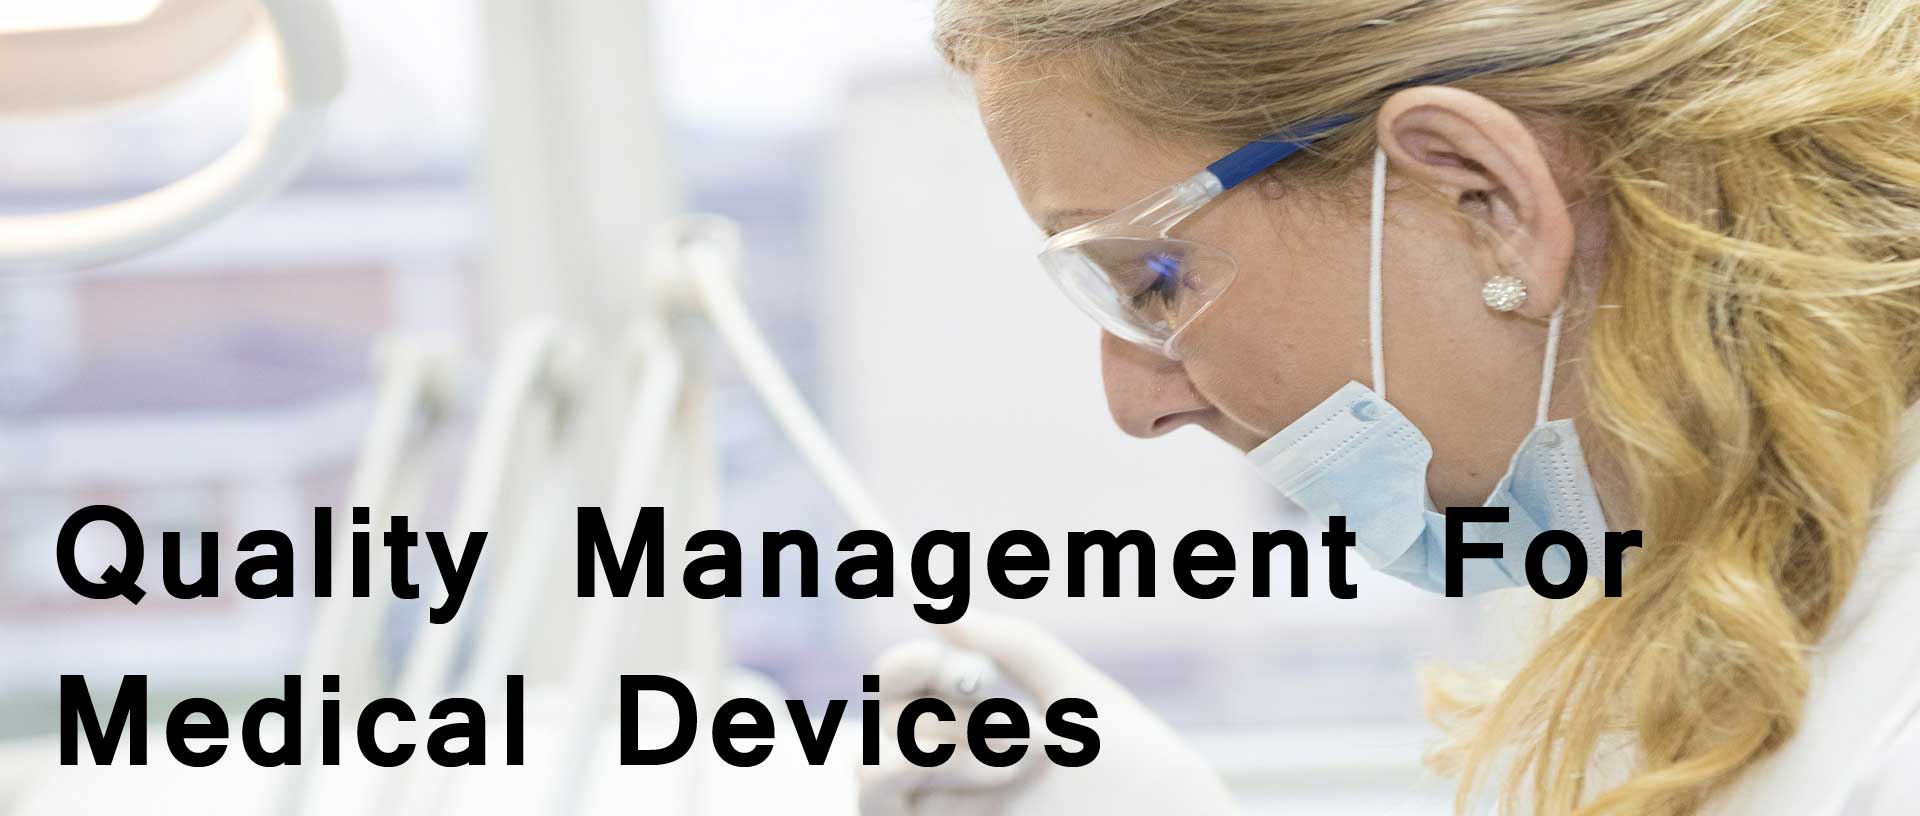 Quality_Management_For_Medical_Devices